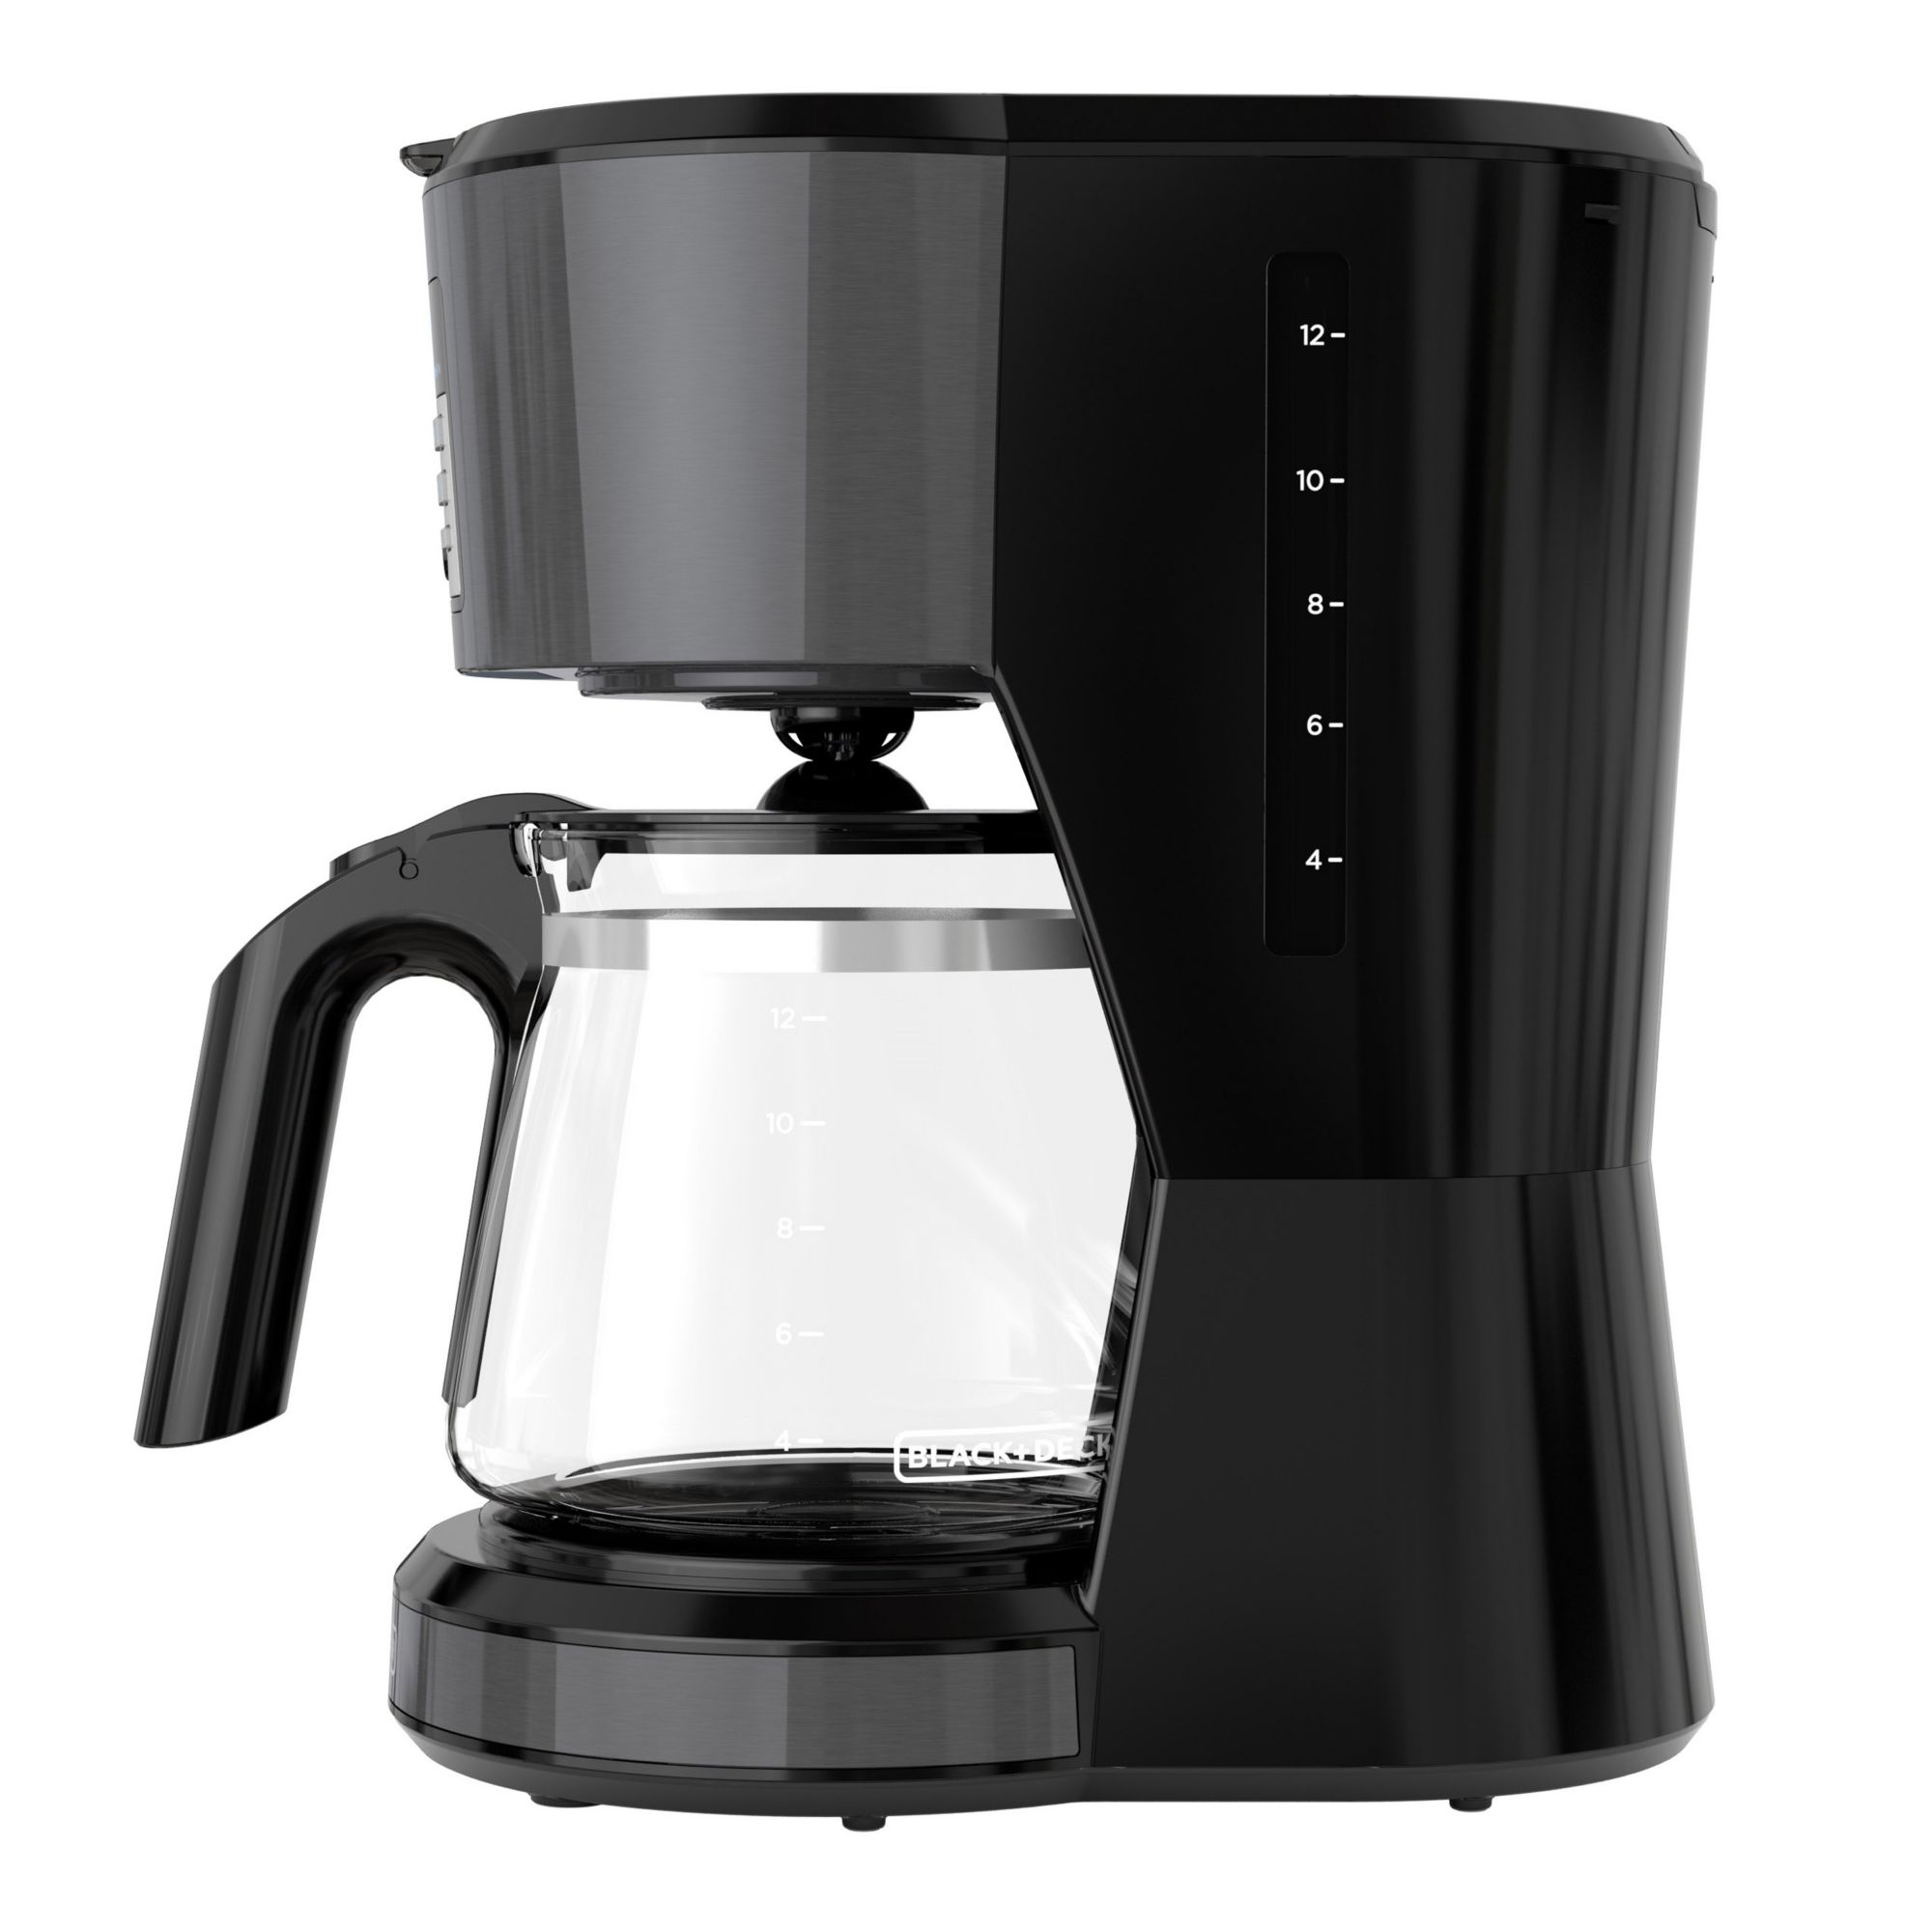 BLACK & DECKER 12 Cup Programmable Coffee Maker - Black (for PARTS) -  electronics - by owner - sale - craigslist